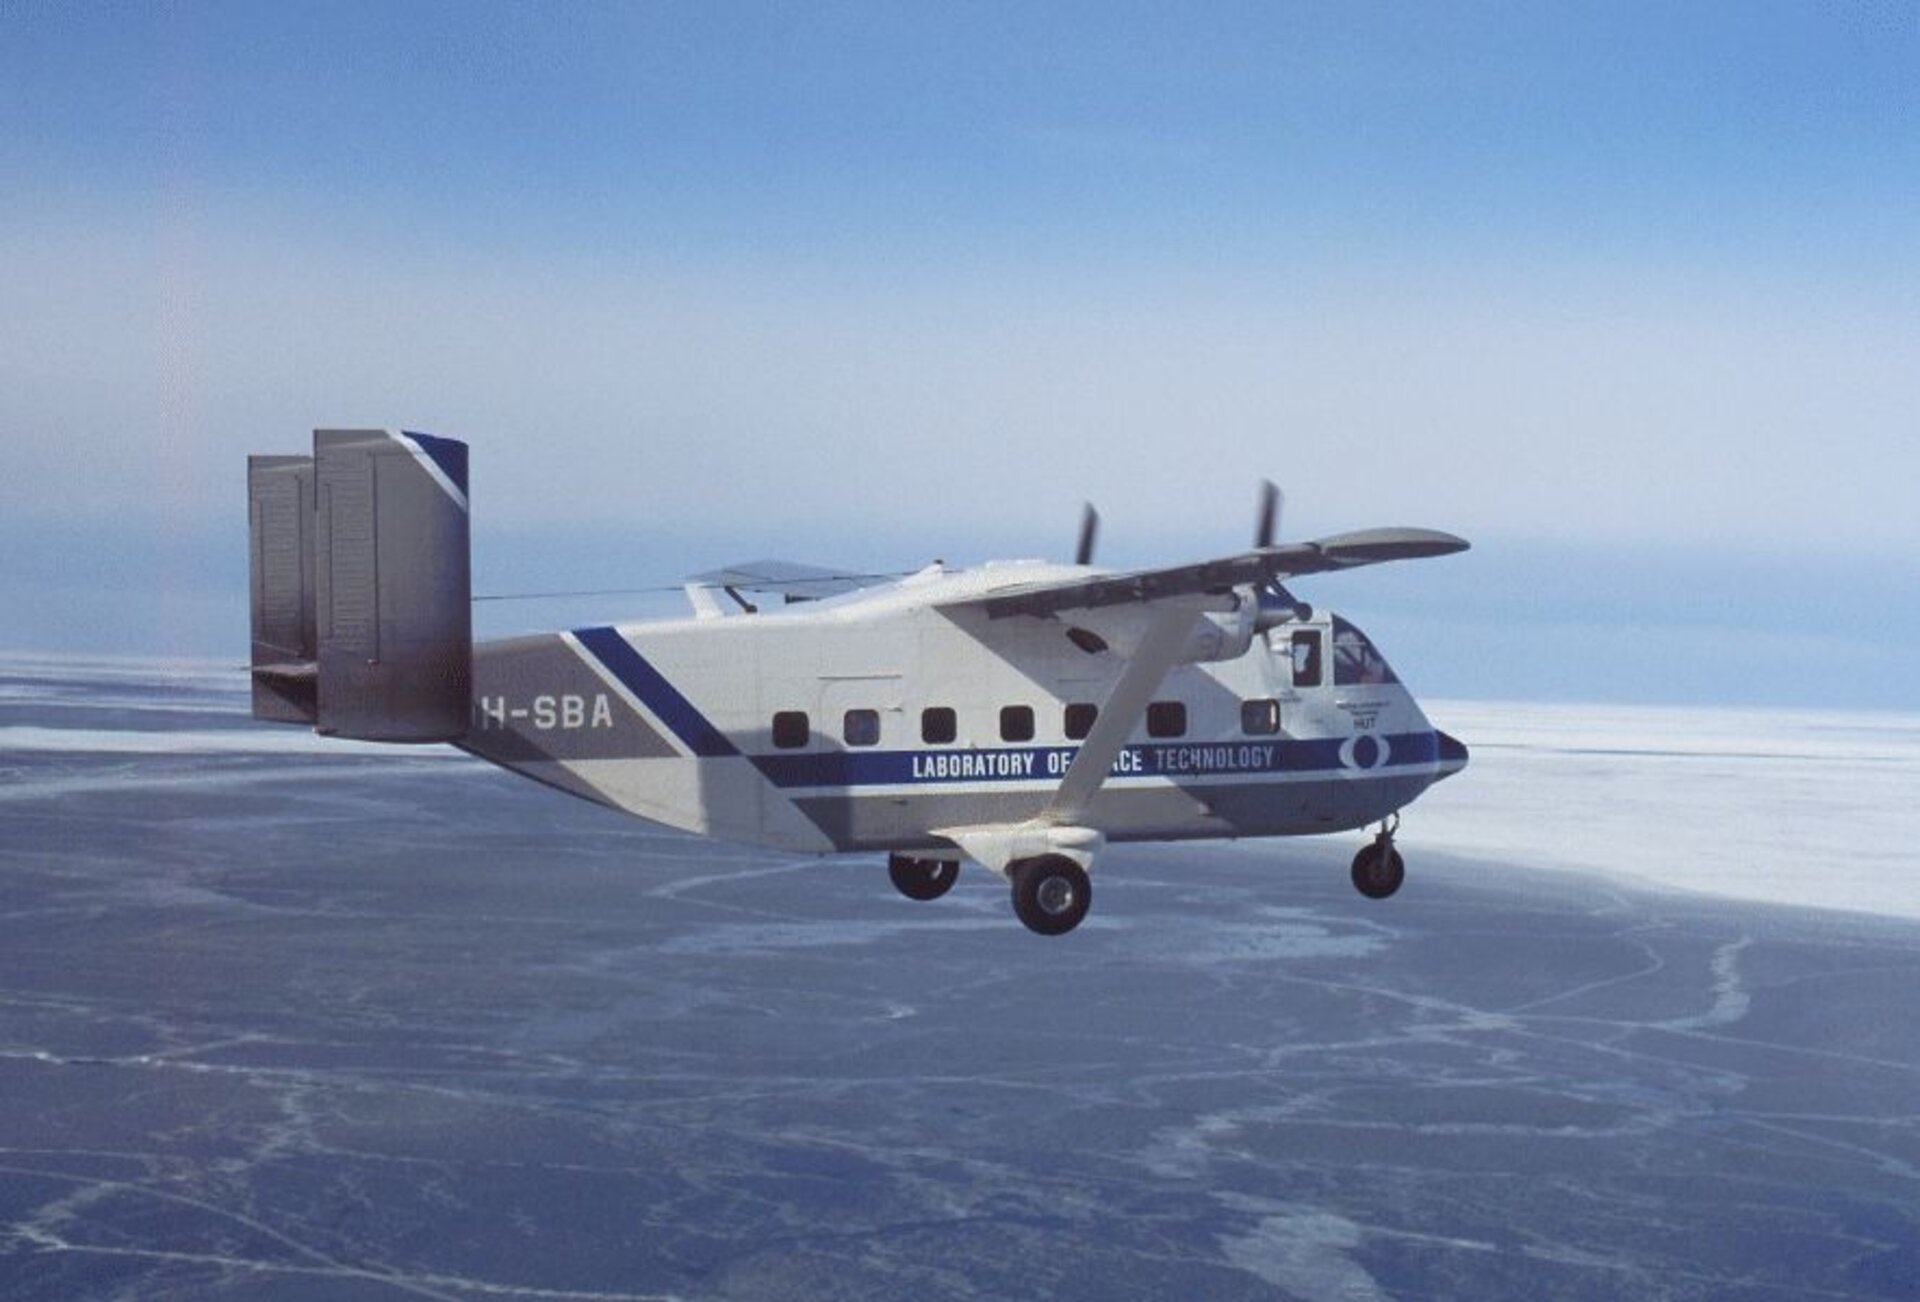 Skyvan research aircraft